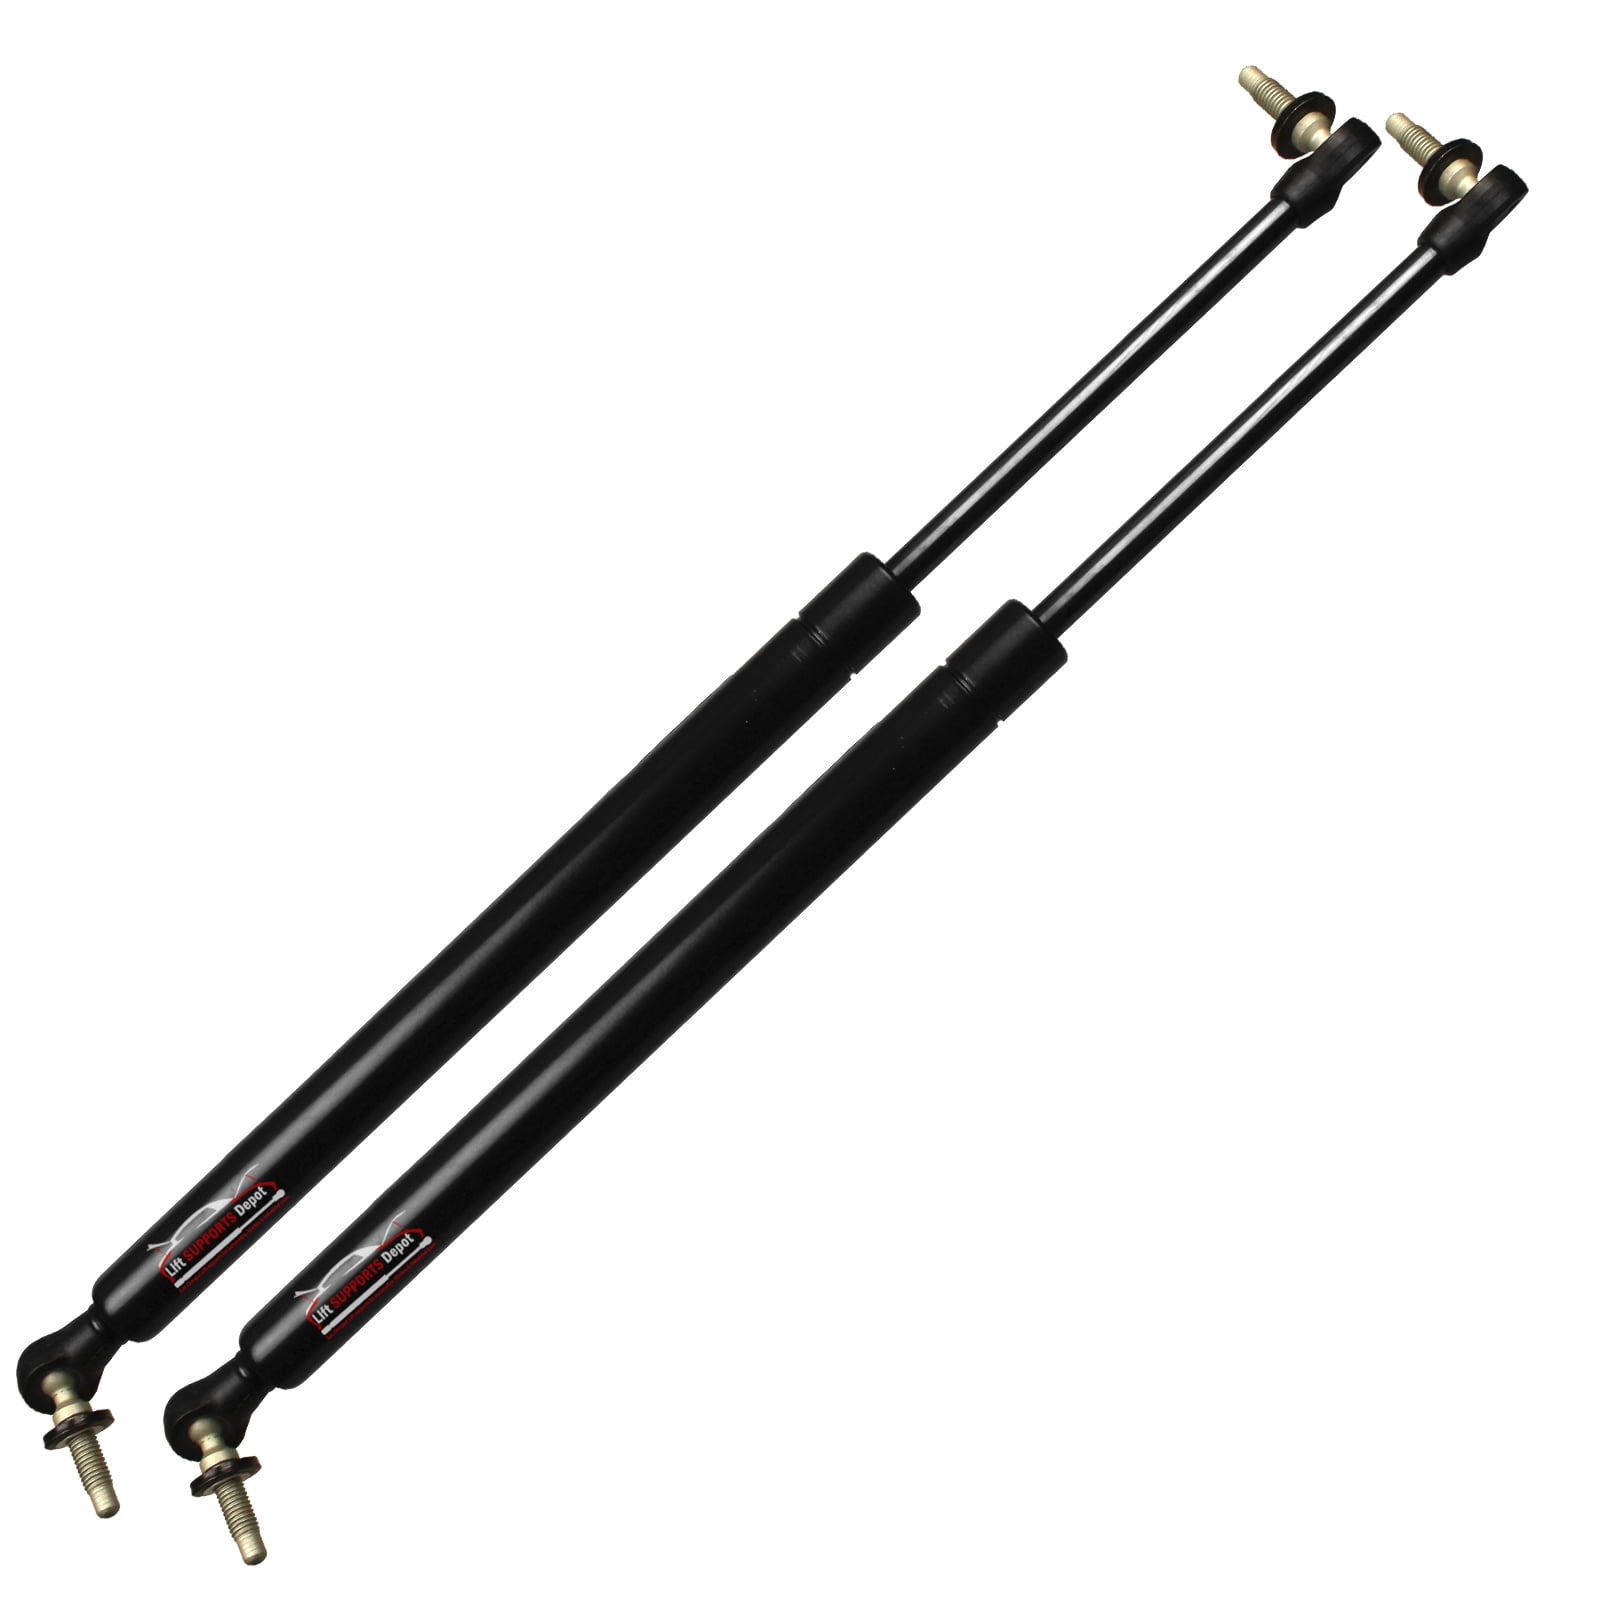 2x Hatch Liftgate Lift Supports Struts for Chrysler Town & Country Caravan 01-07